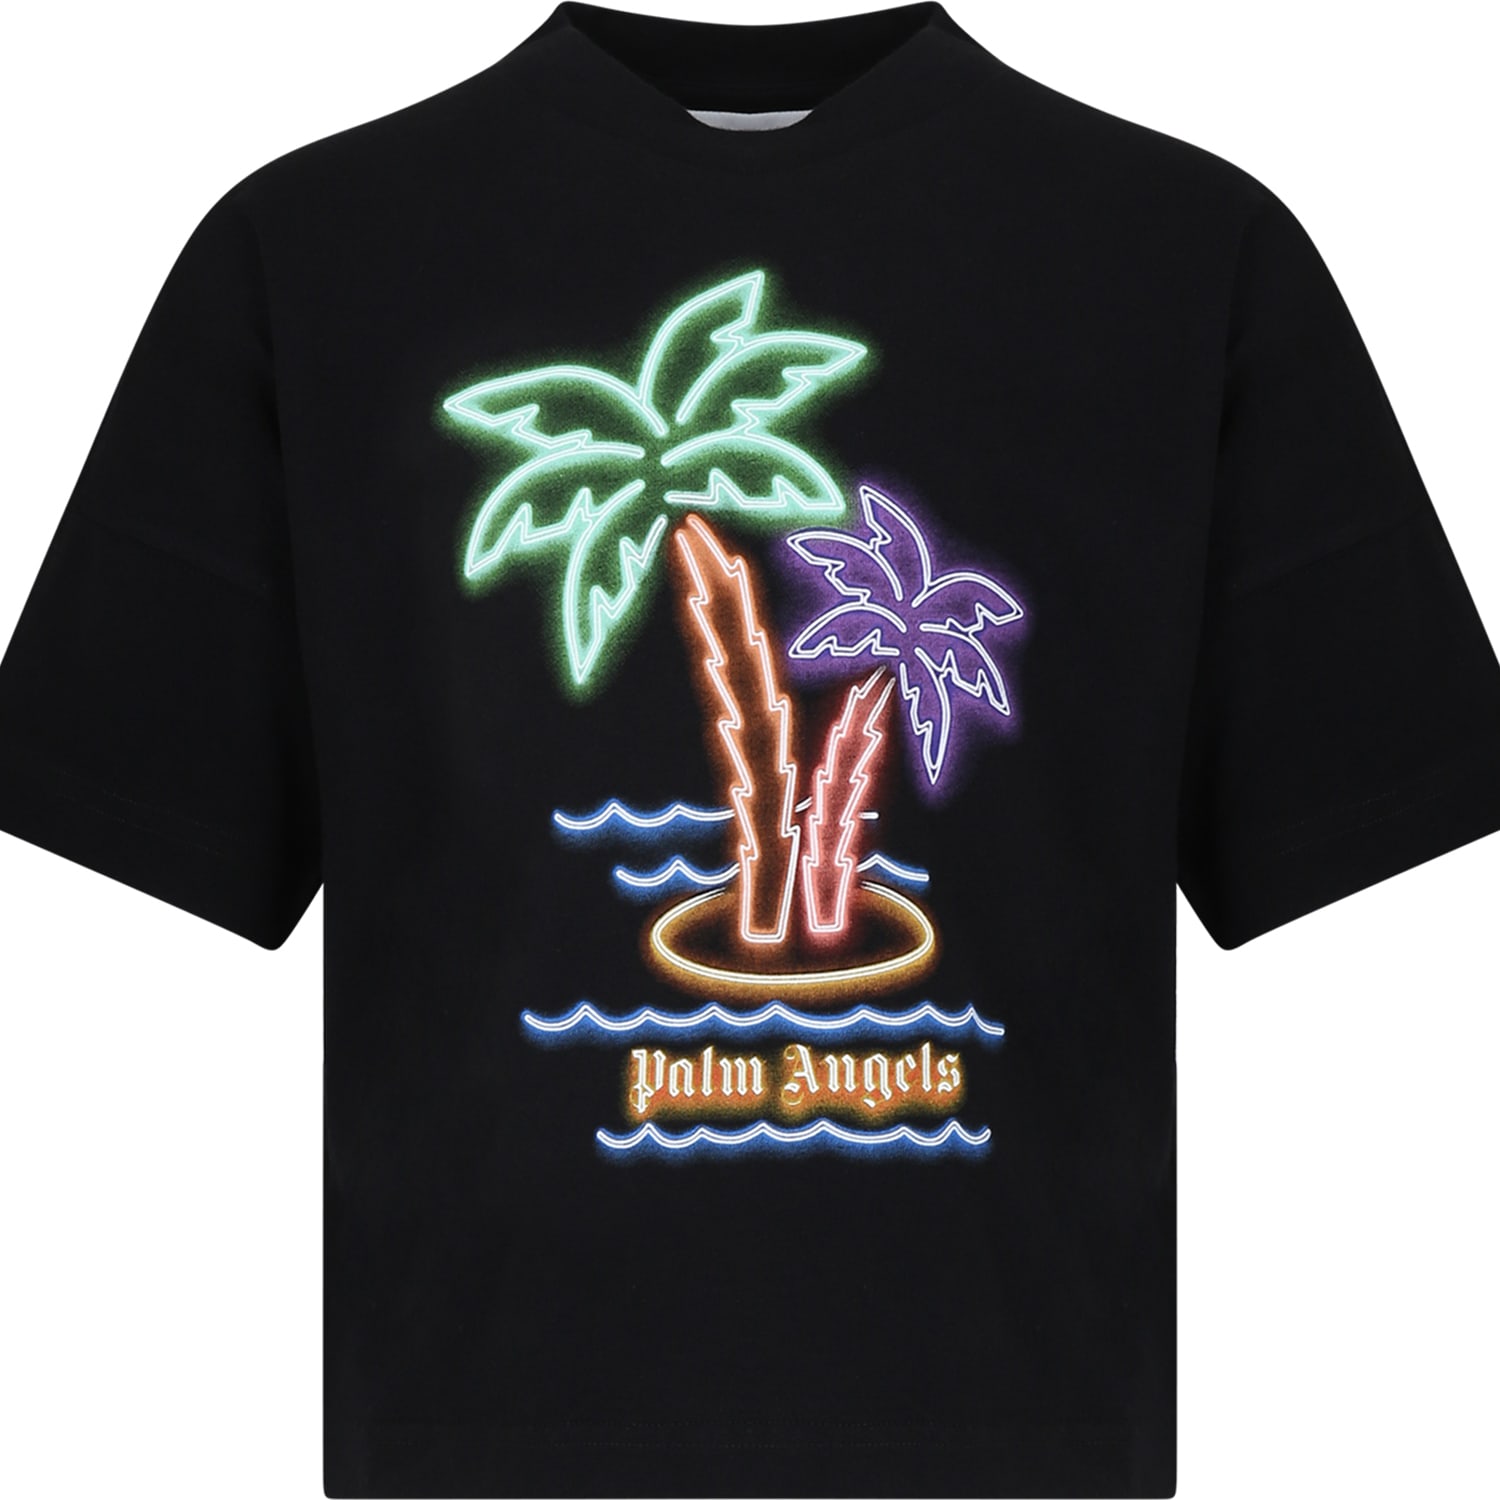 PALM ANGELS BLACK T-SHIRT FOR BOY WITH PALM TREE